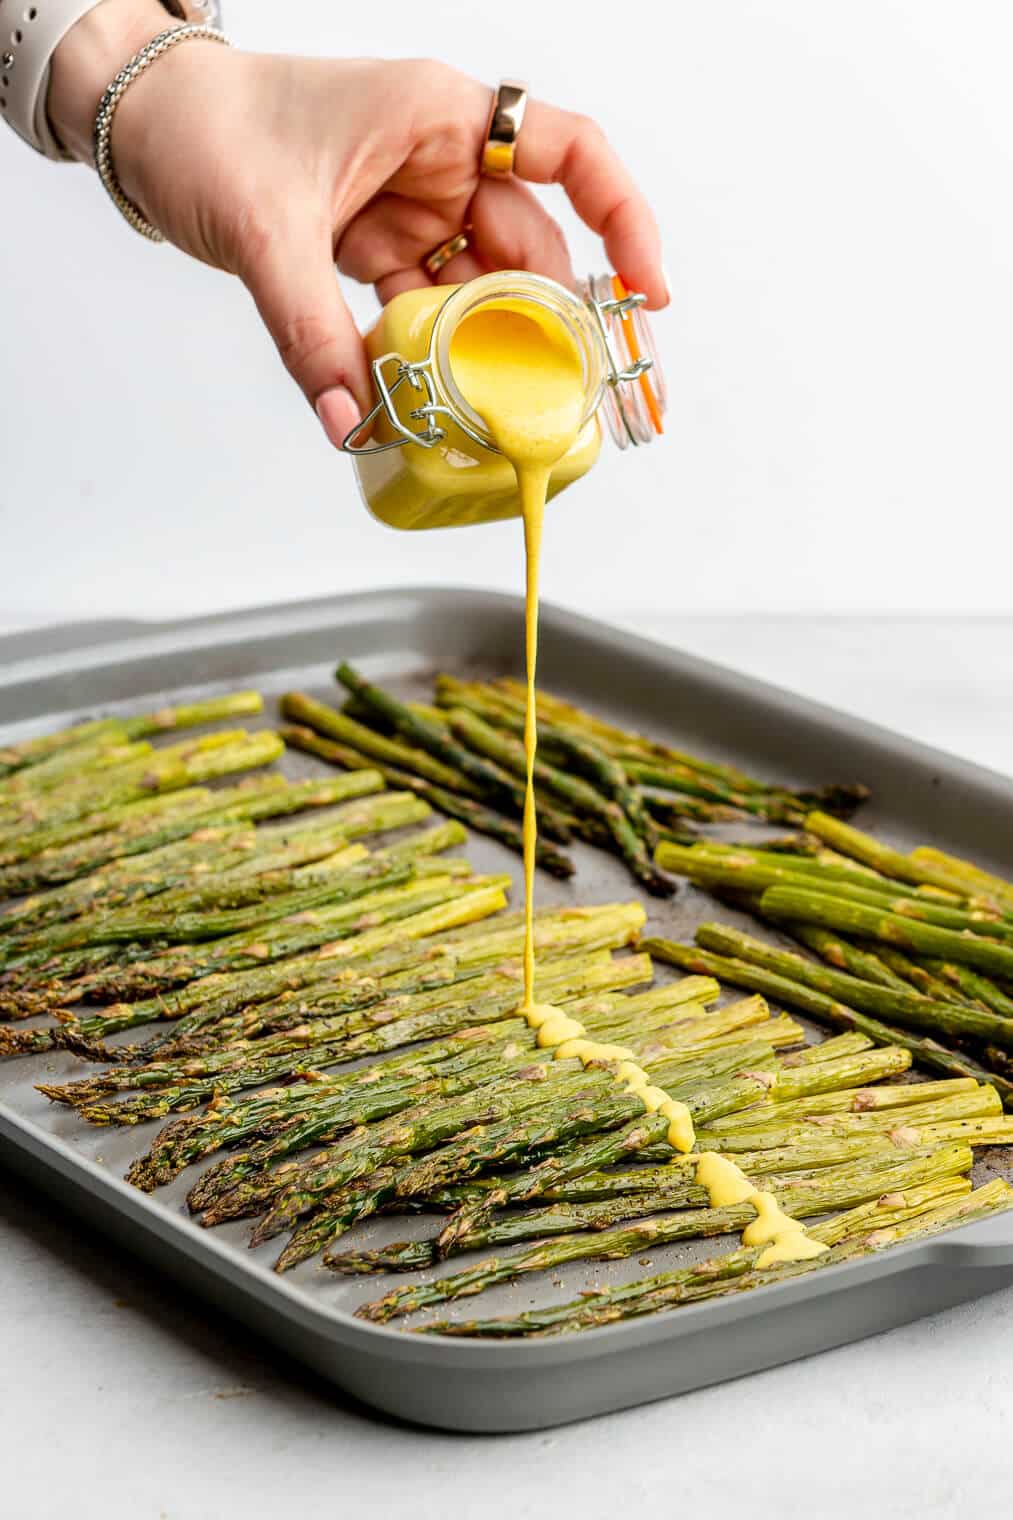 A person pouring bright yellow lemon cardamom sauce over a sheet pan of roasted asparagus.